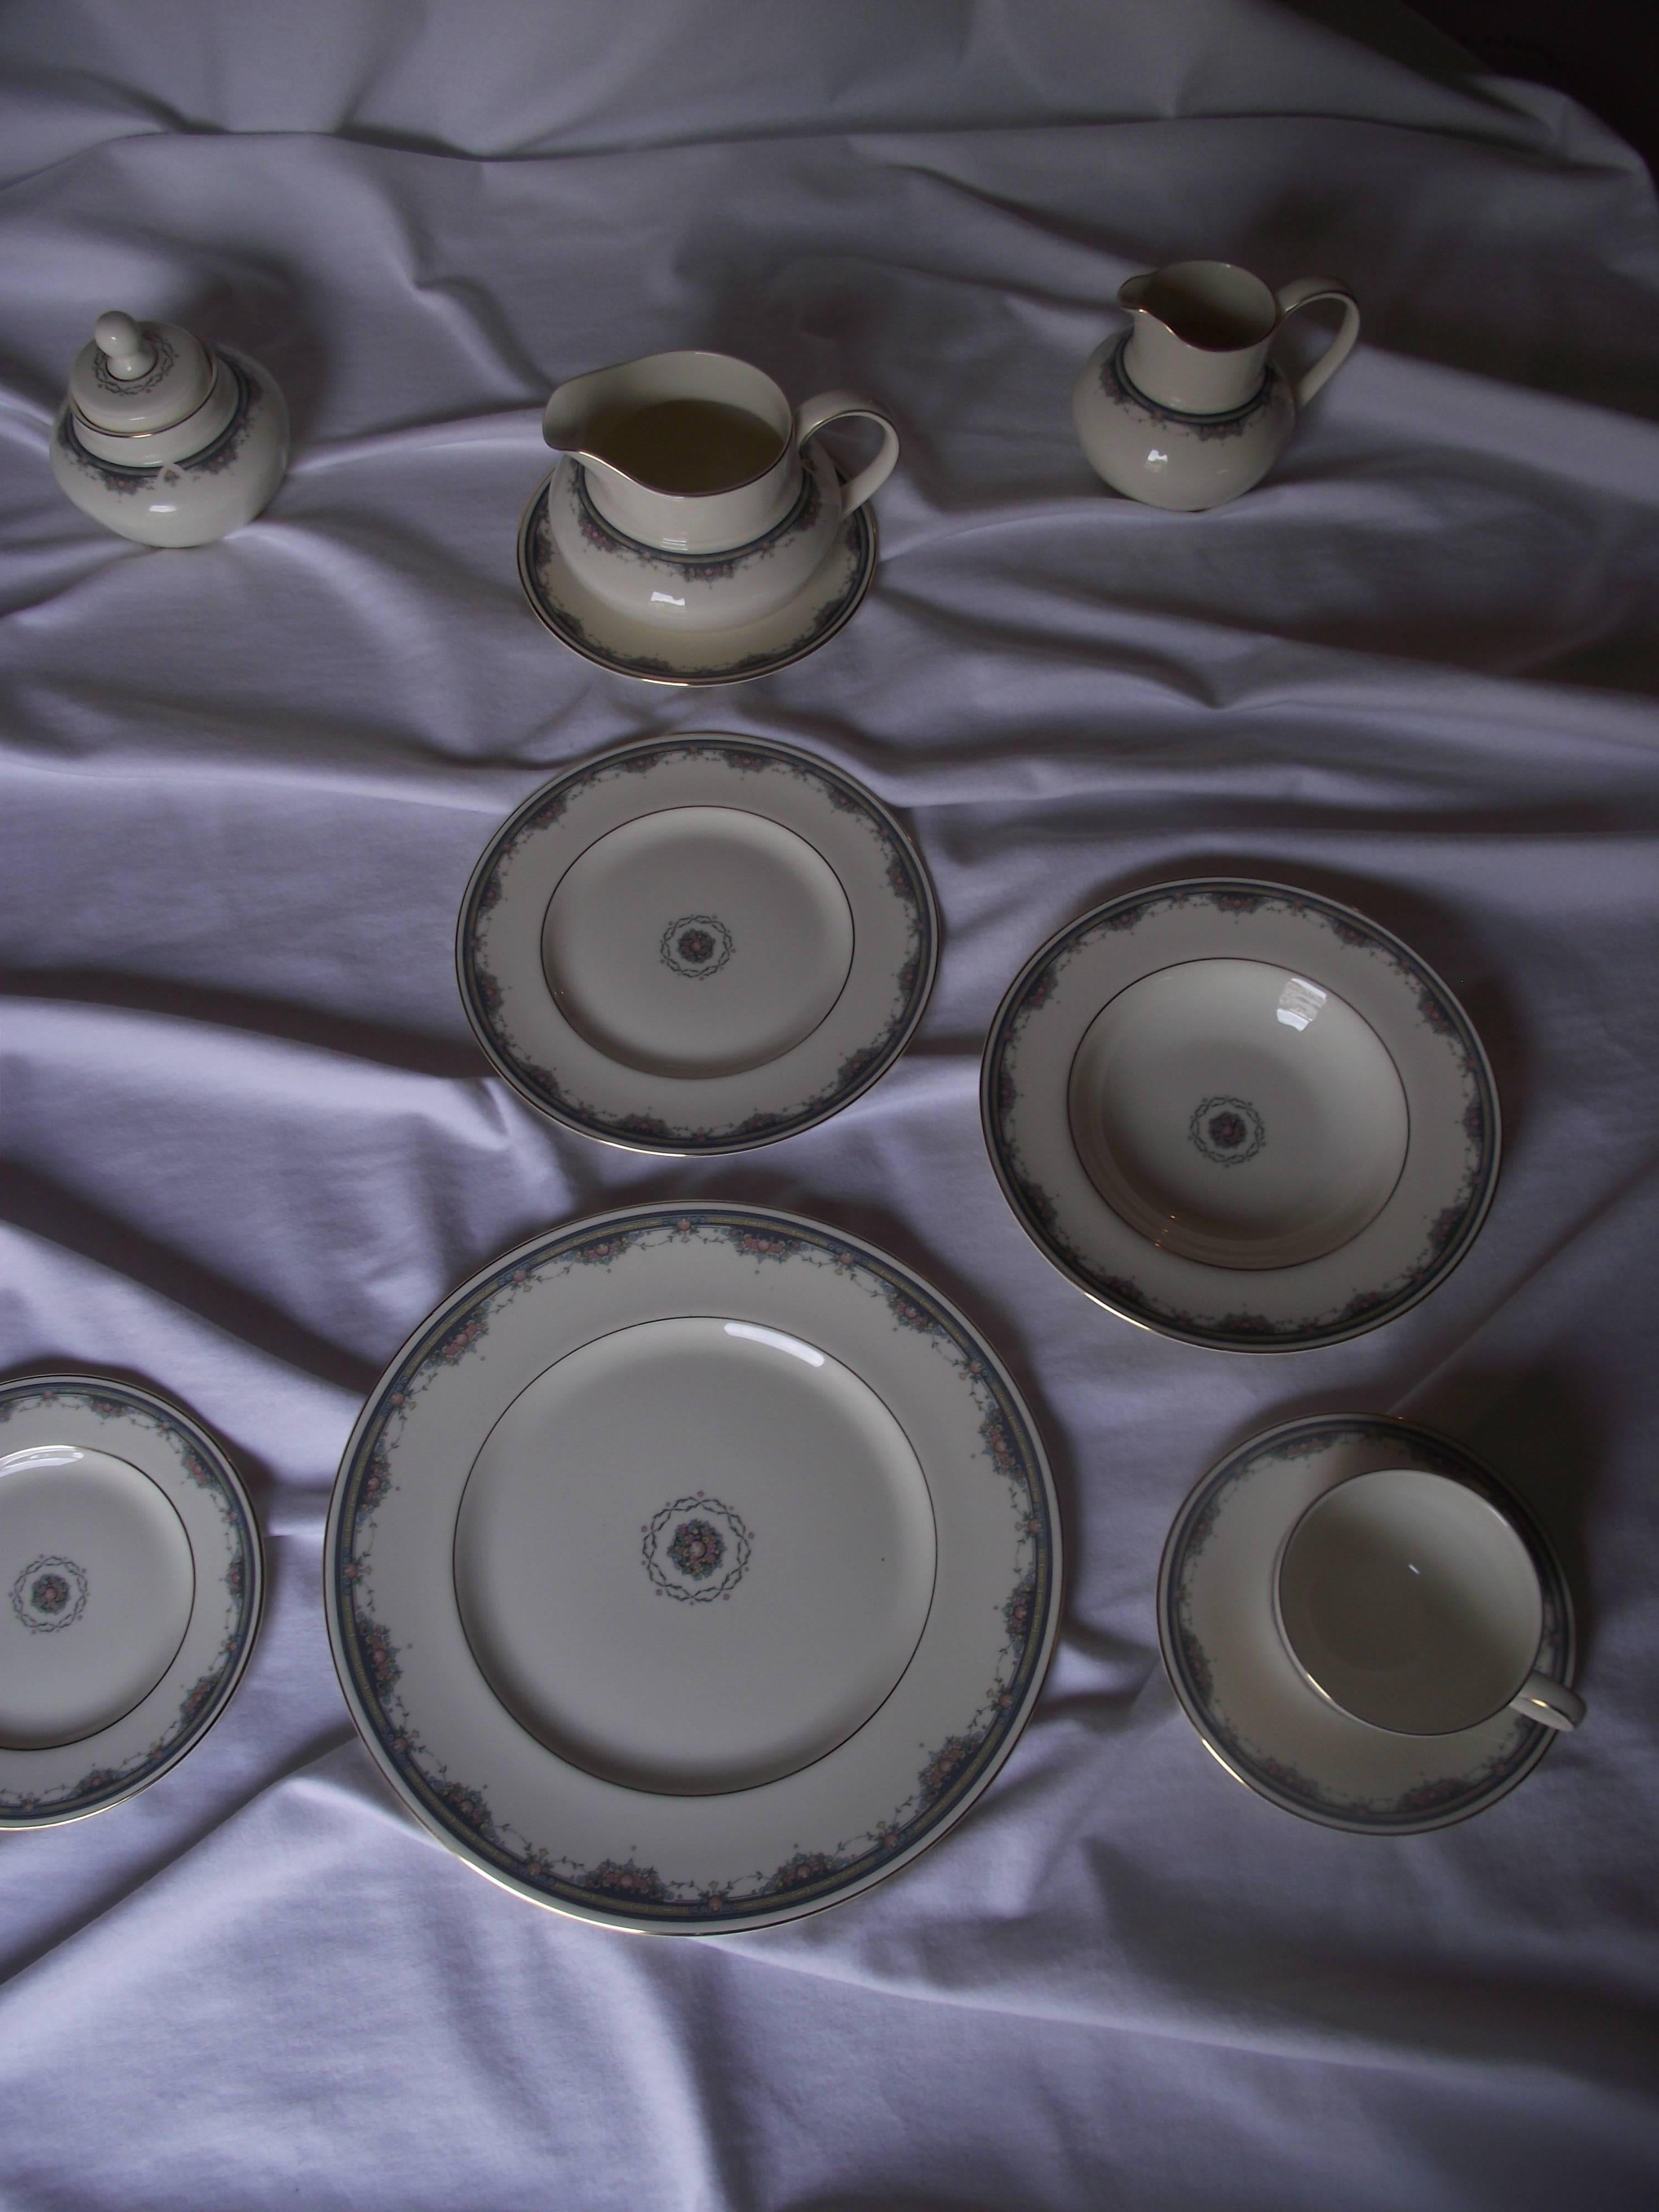 This beautiful Royal Doulton bone china is a complete service for eight with extra pieces. It consists of:
Eight soup bowls
Eight bread and butter plates
16 desert/salad plates
16 dinner plates
Eight tea cups and saucers
One covered sugar and